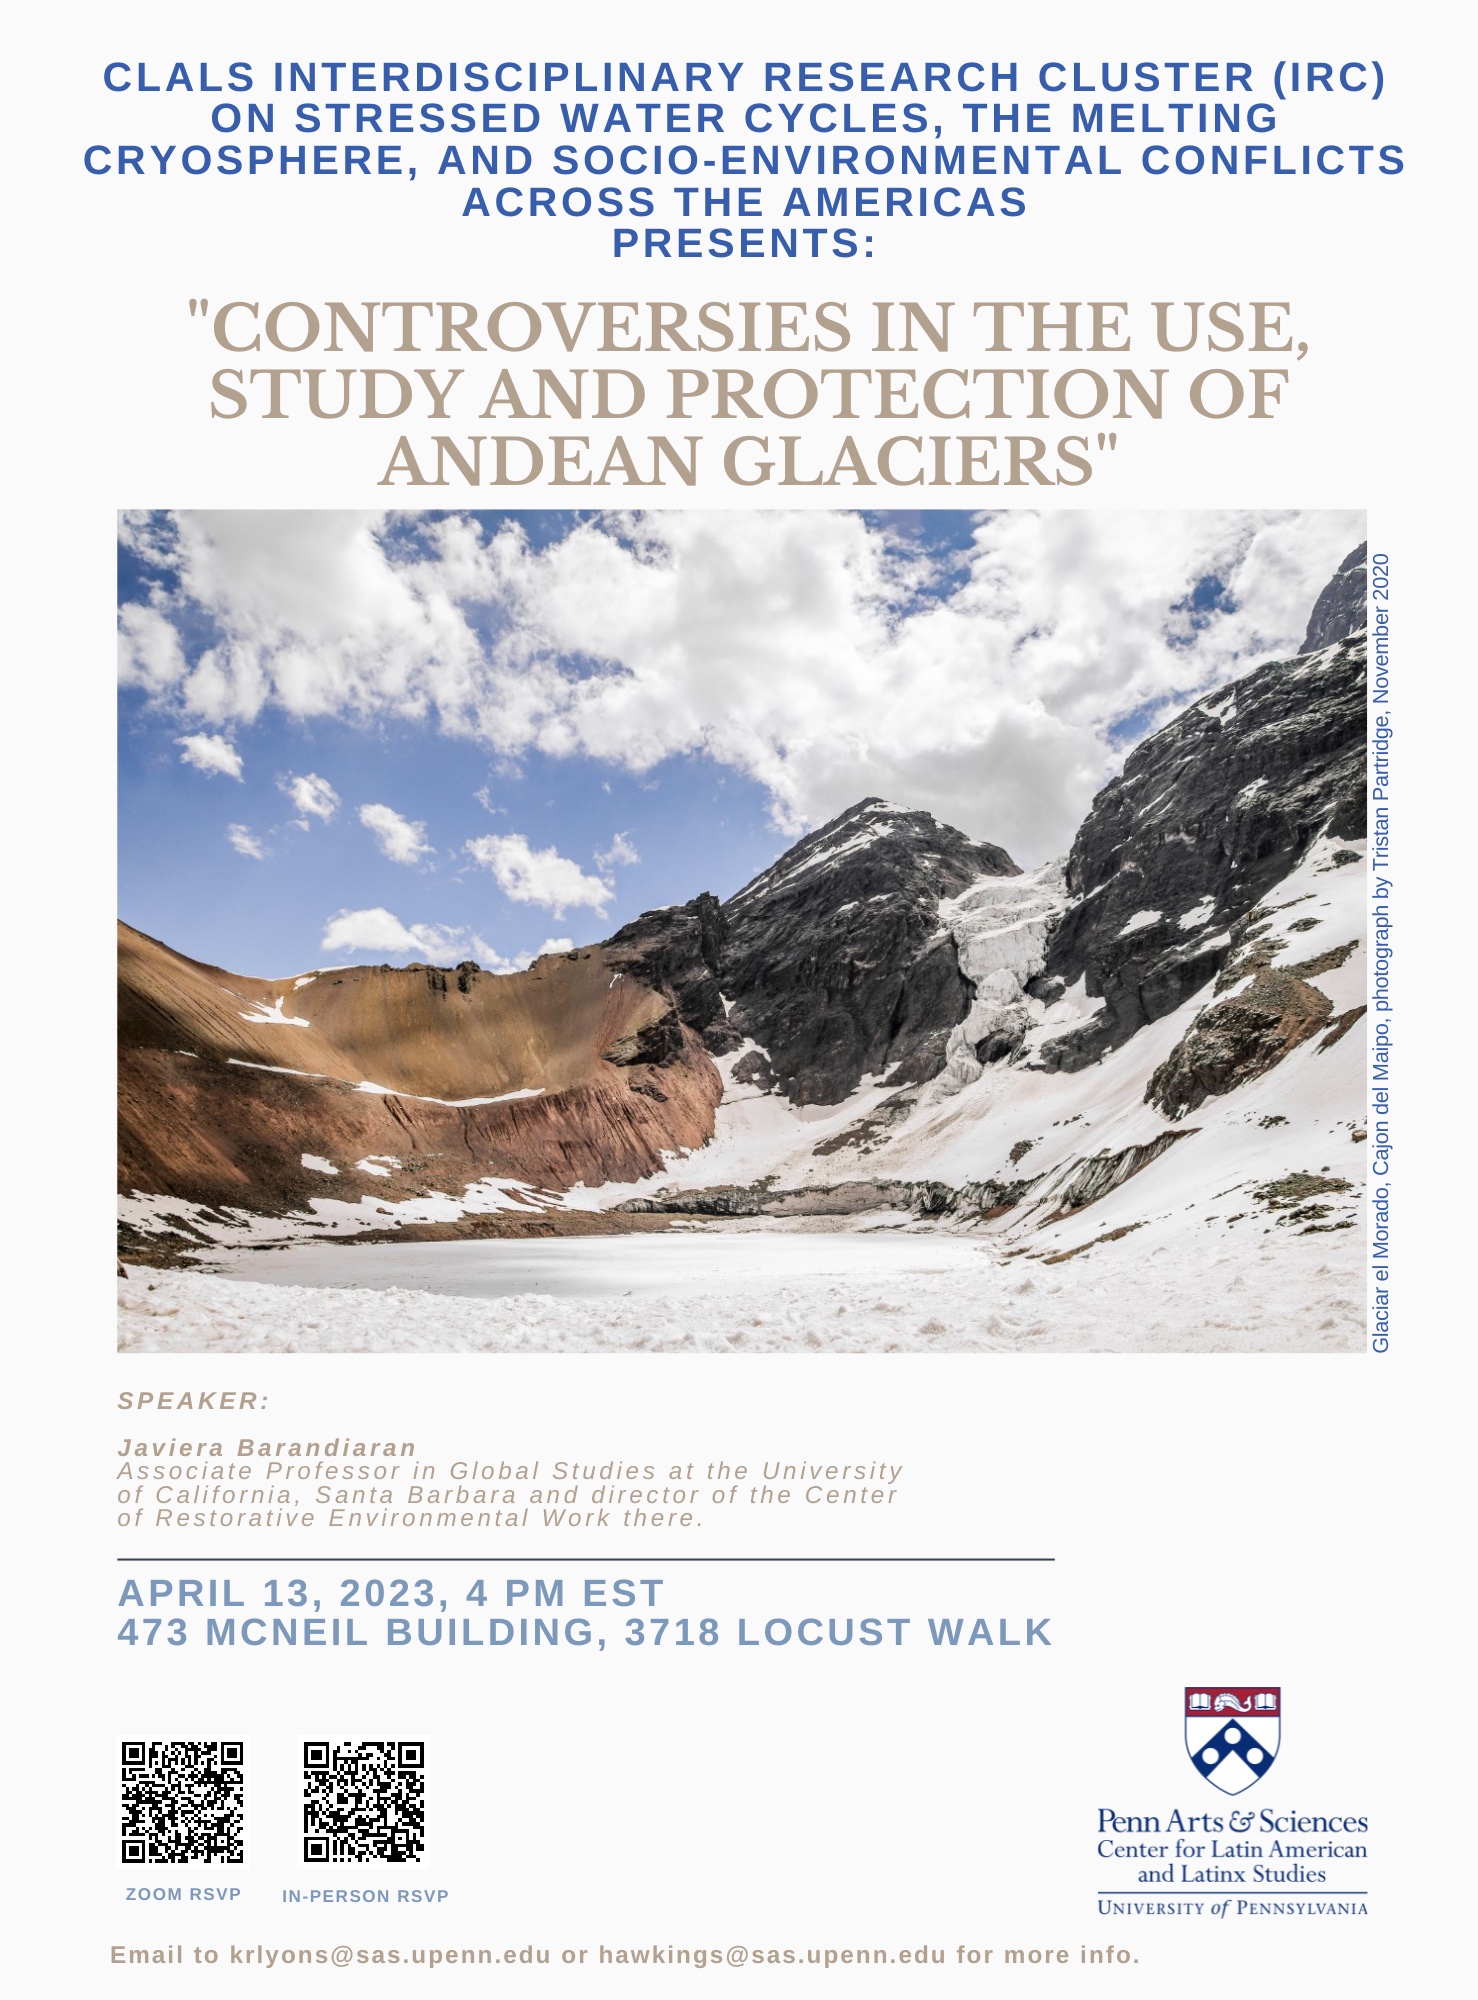 Controversies in the Use, Study, and Protection of Andean Glaciers event poster